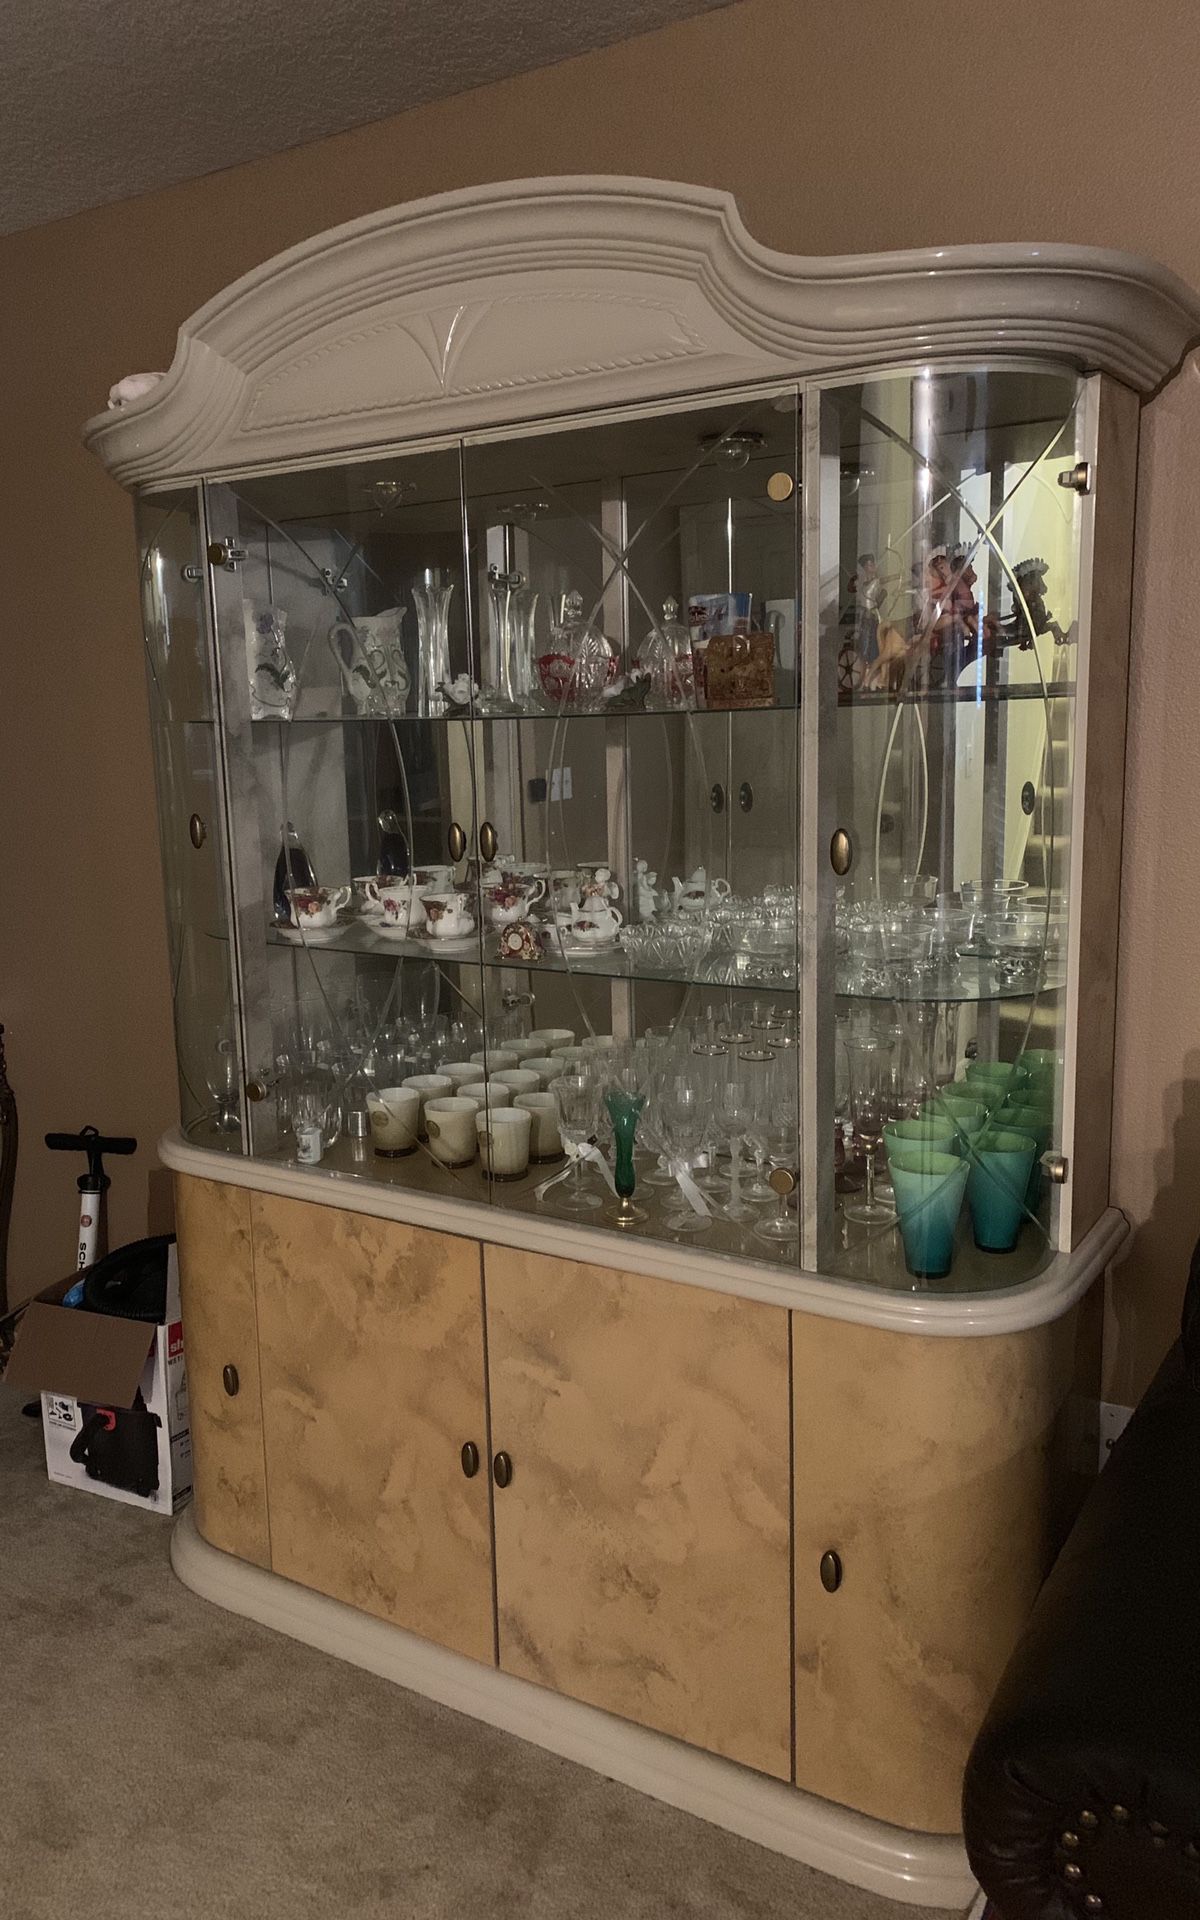 China Cabinet for plates/tea pots and other decor